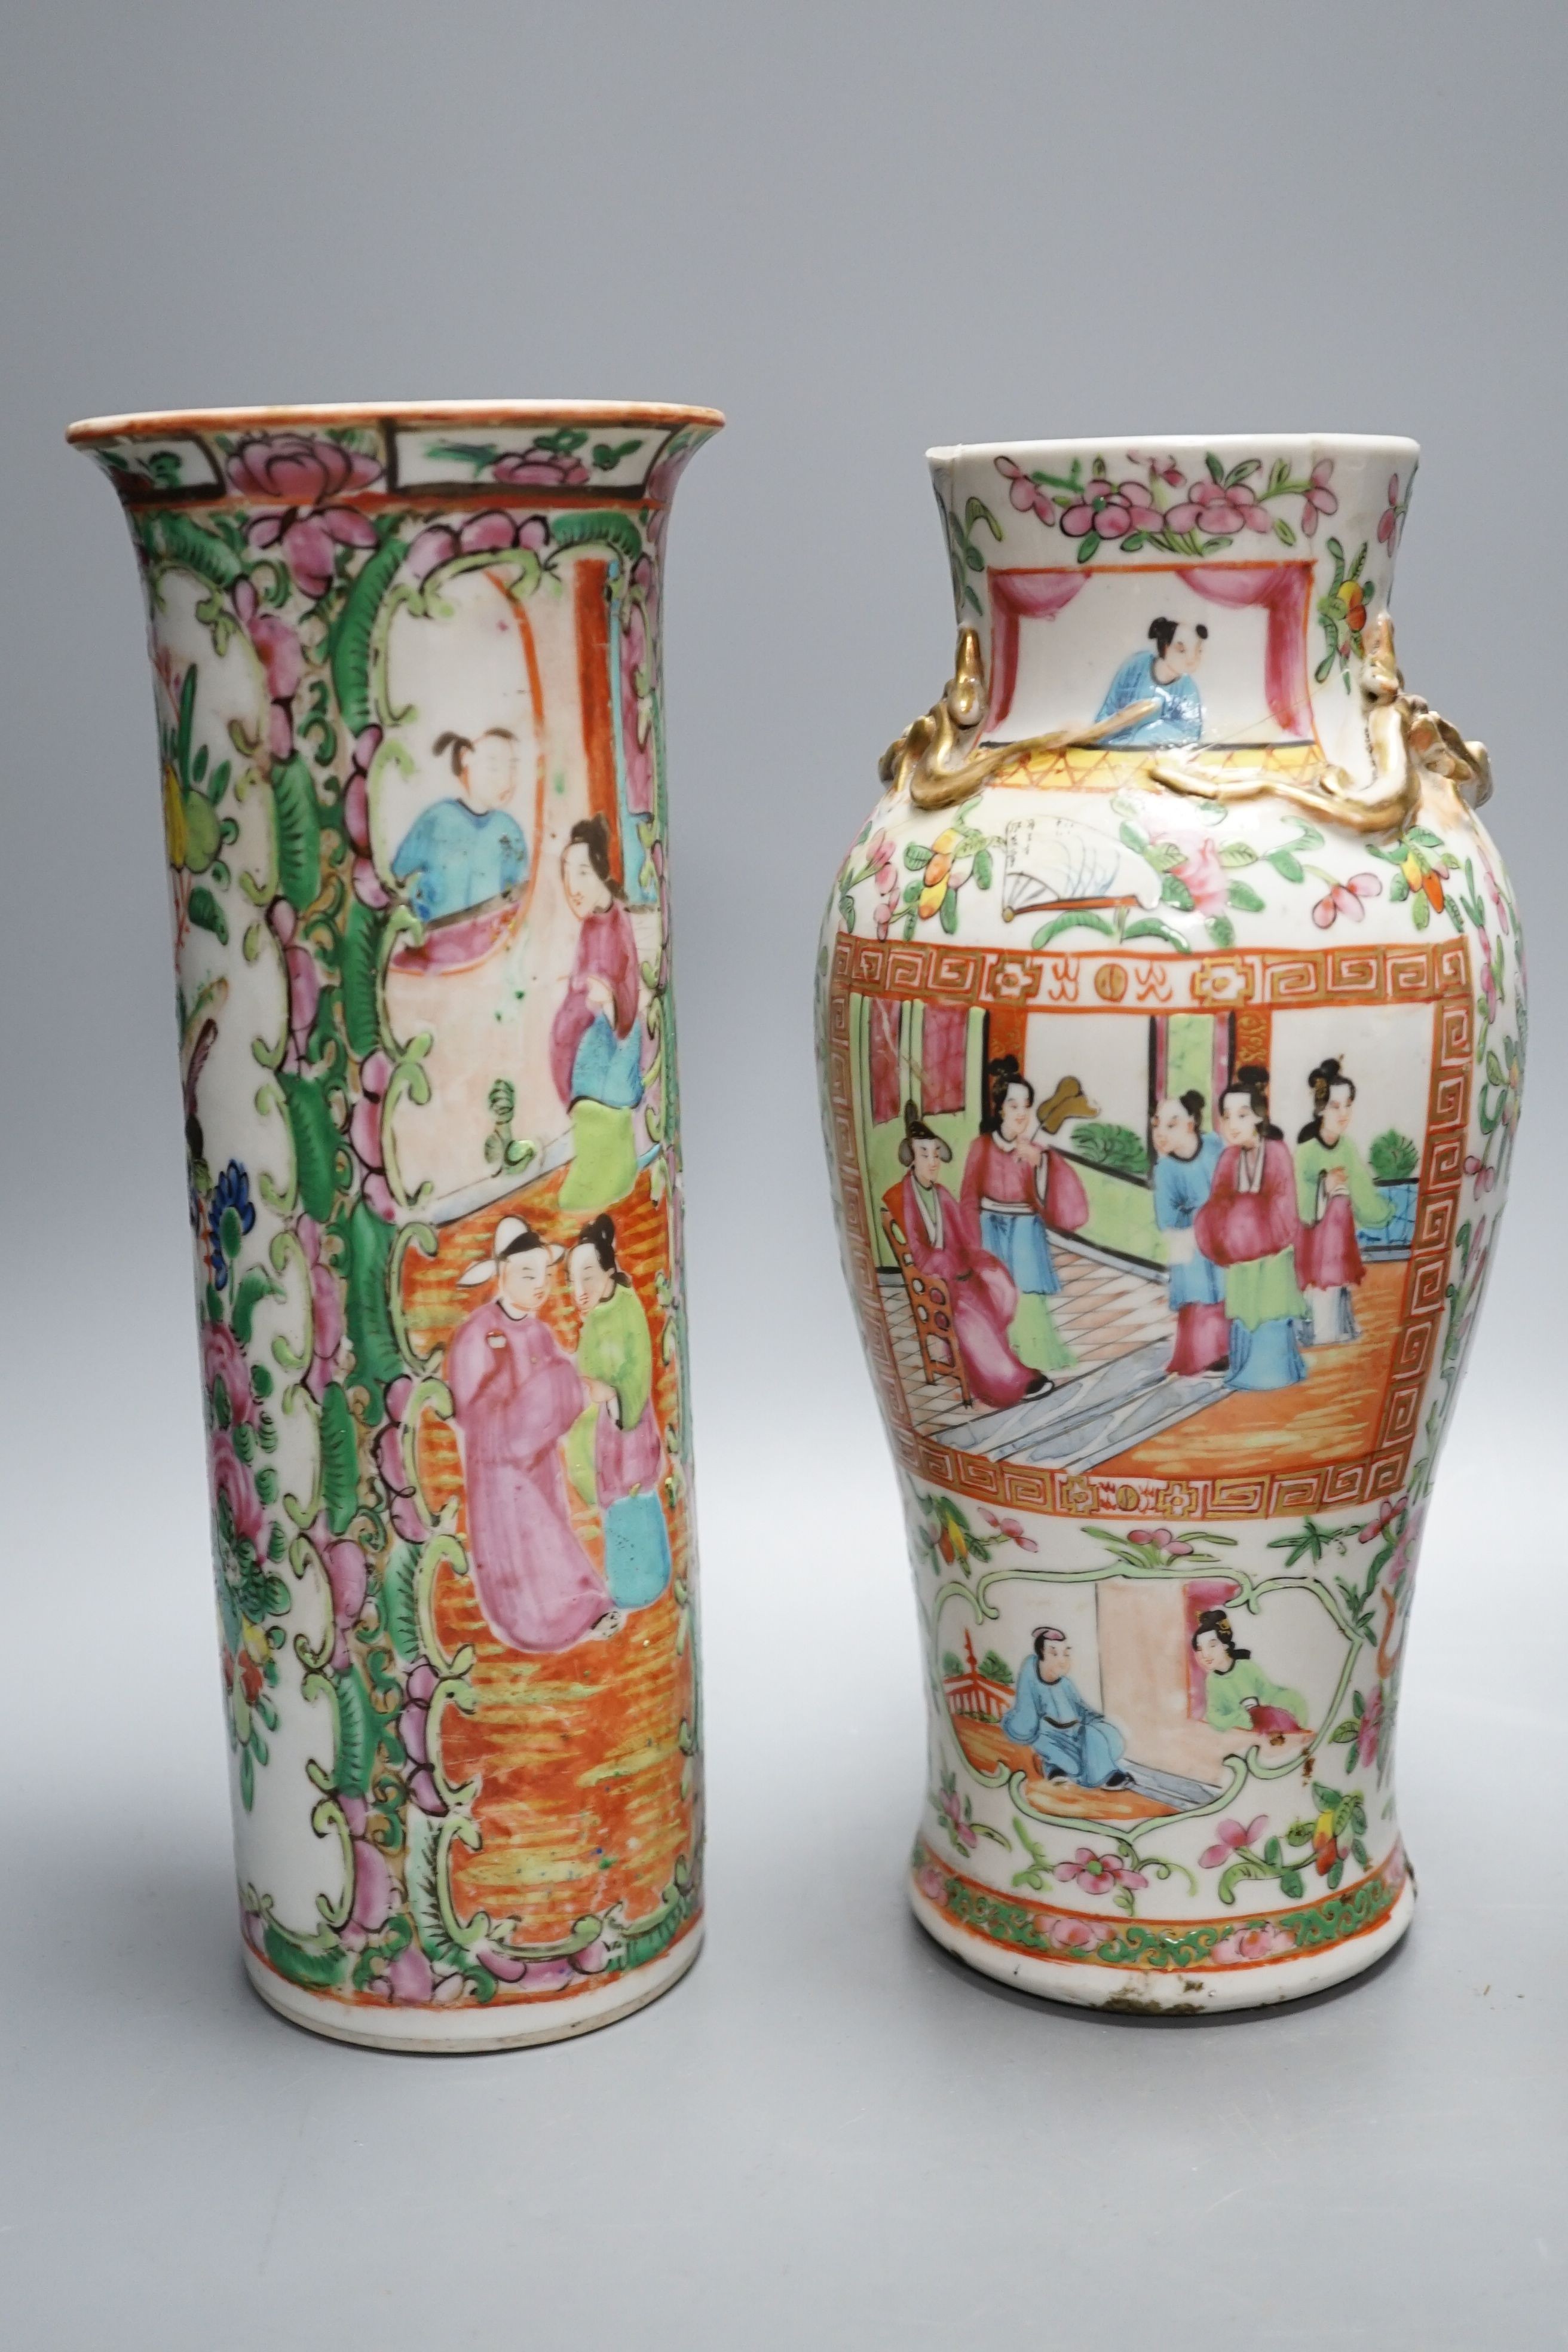 Two Chinese famille rose vases, two Chinese famille rose teapots and a blue ground enamelled jar tallest 26.5cm